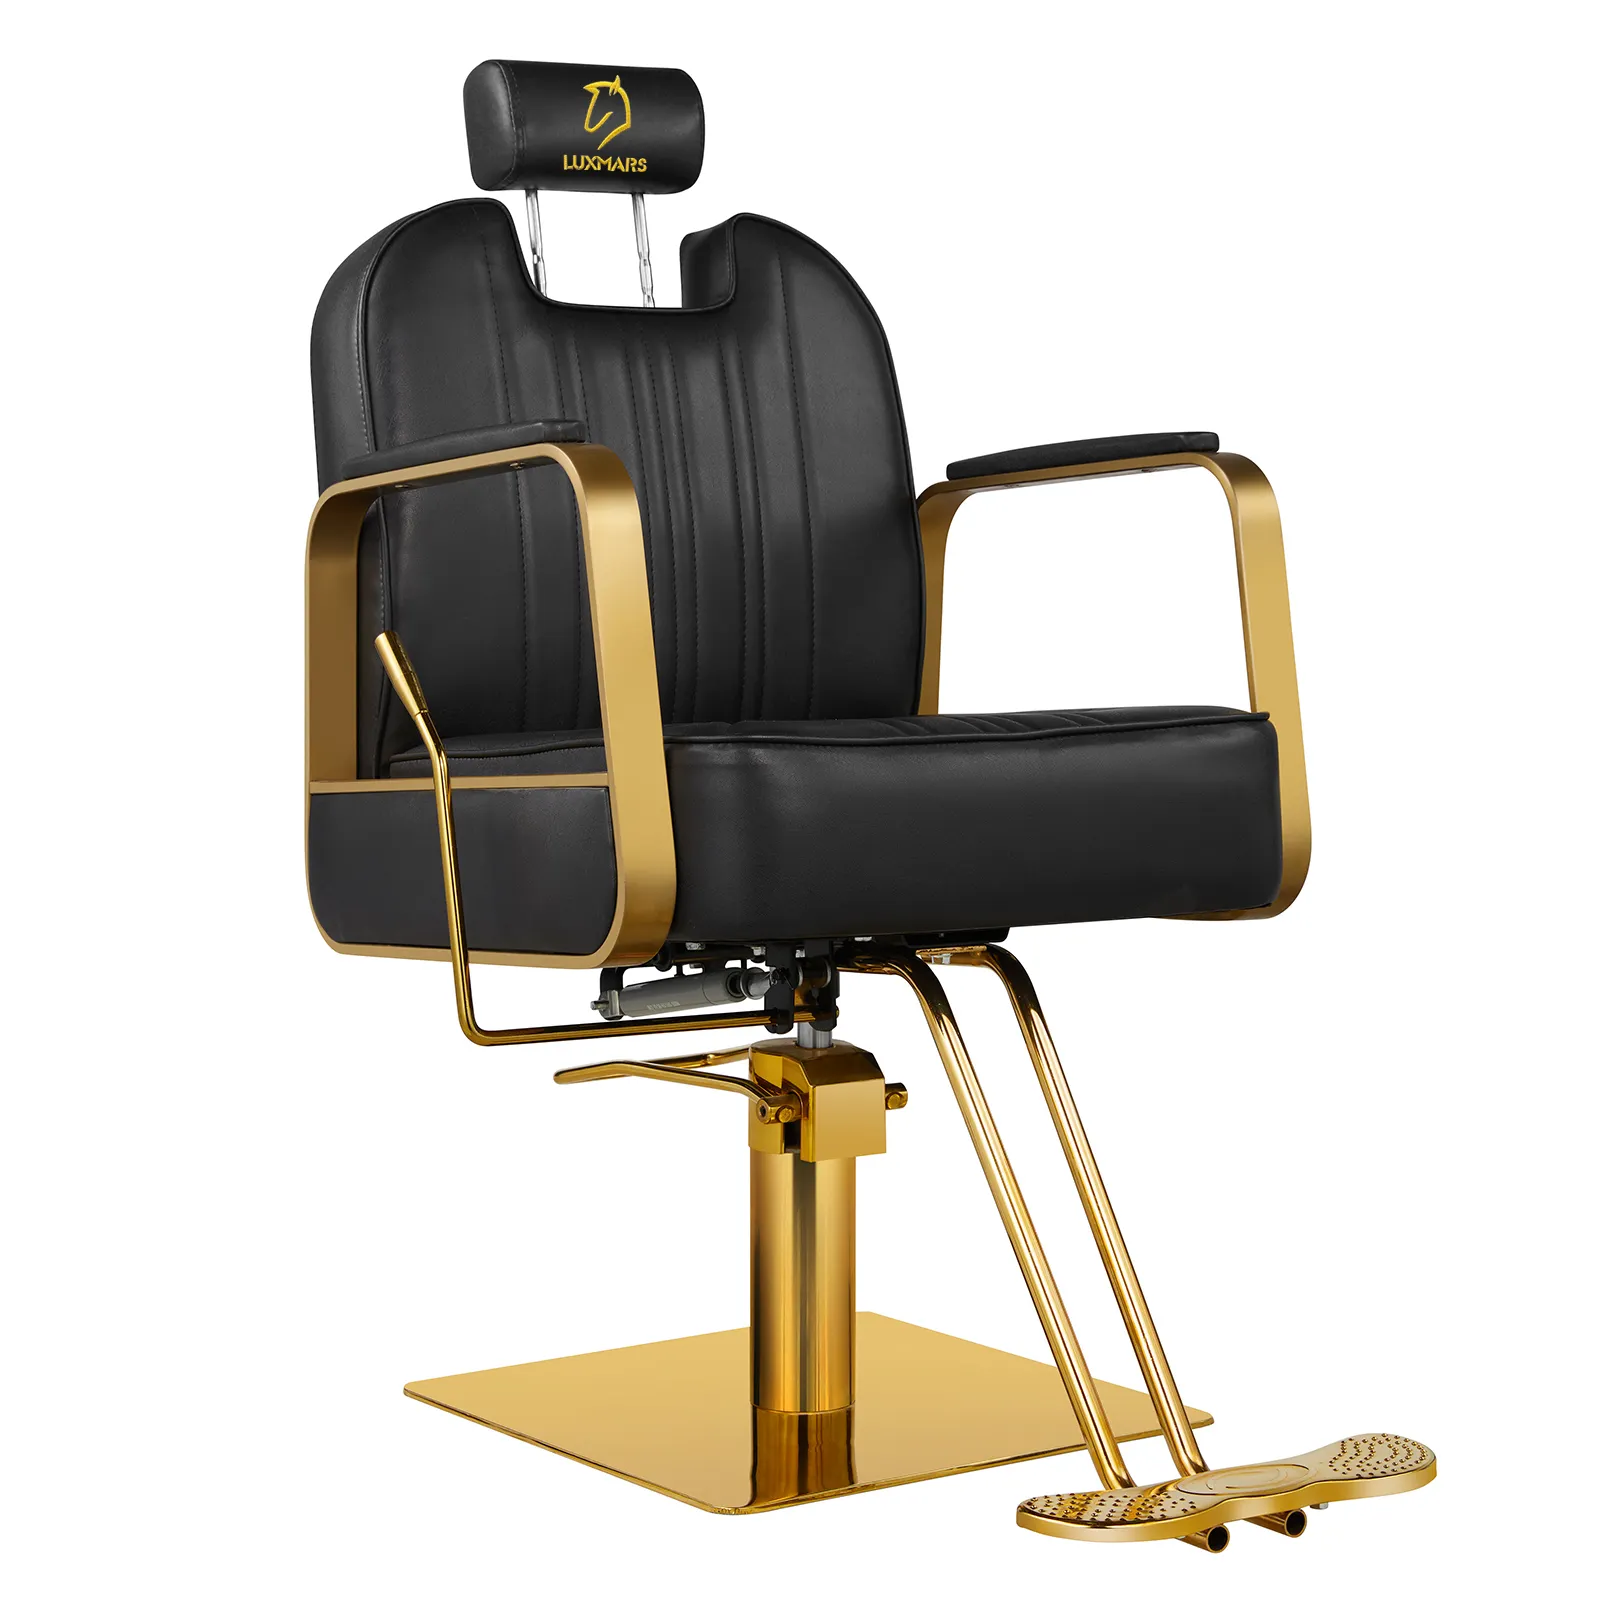 High-quality Affordable Hydraulic Flexible styling salon chairs